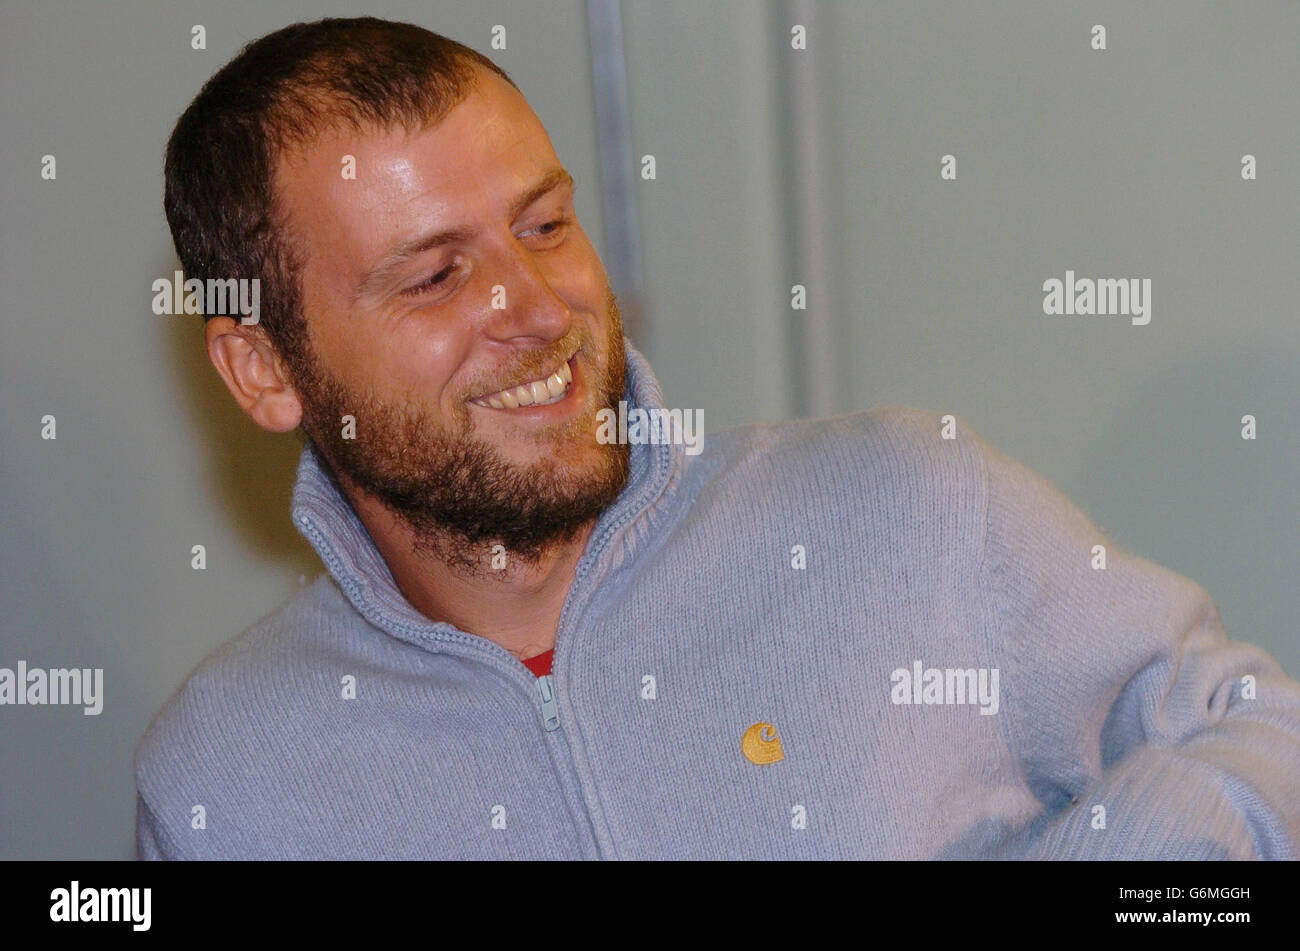 Freed hostage Mark Henderson during a press conference at Heathrow Airport, London. Mr Henderson, 32, flew in from Colombia where he was kidnapped by guerrillas while on a backpacking trip and spent 102 days captive in remote mountain jungles. After months of tension and worry he was finally released earlier this week. Stock Photo